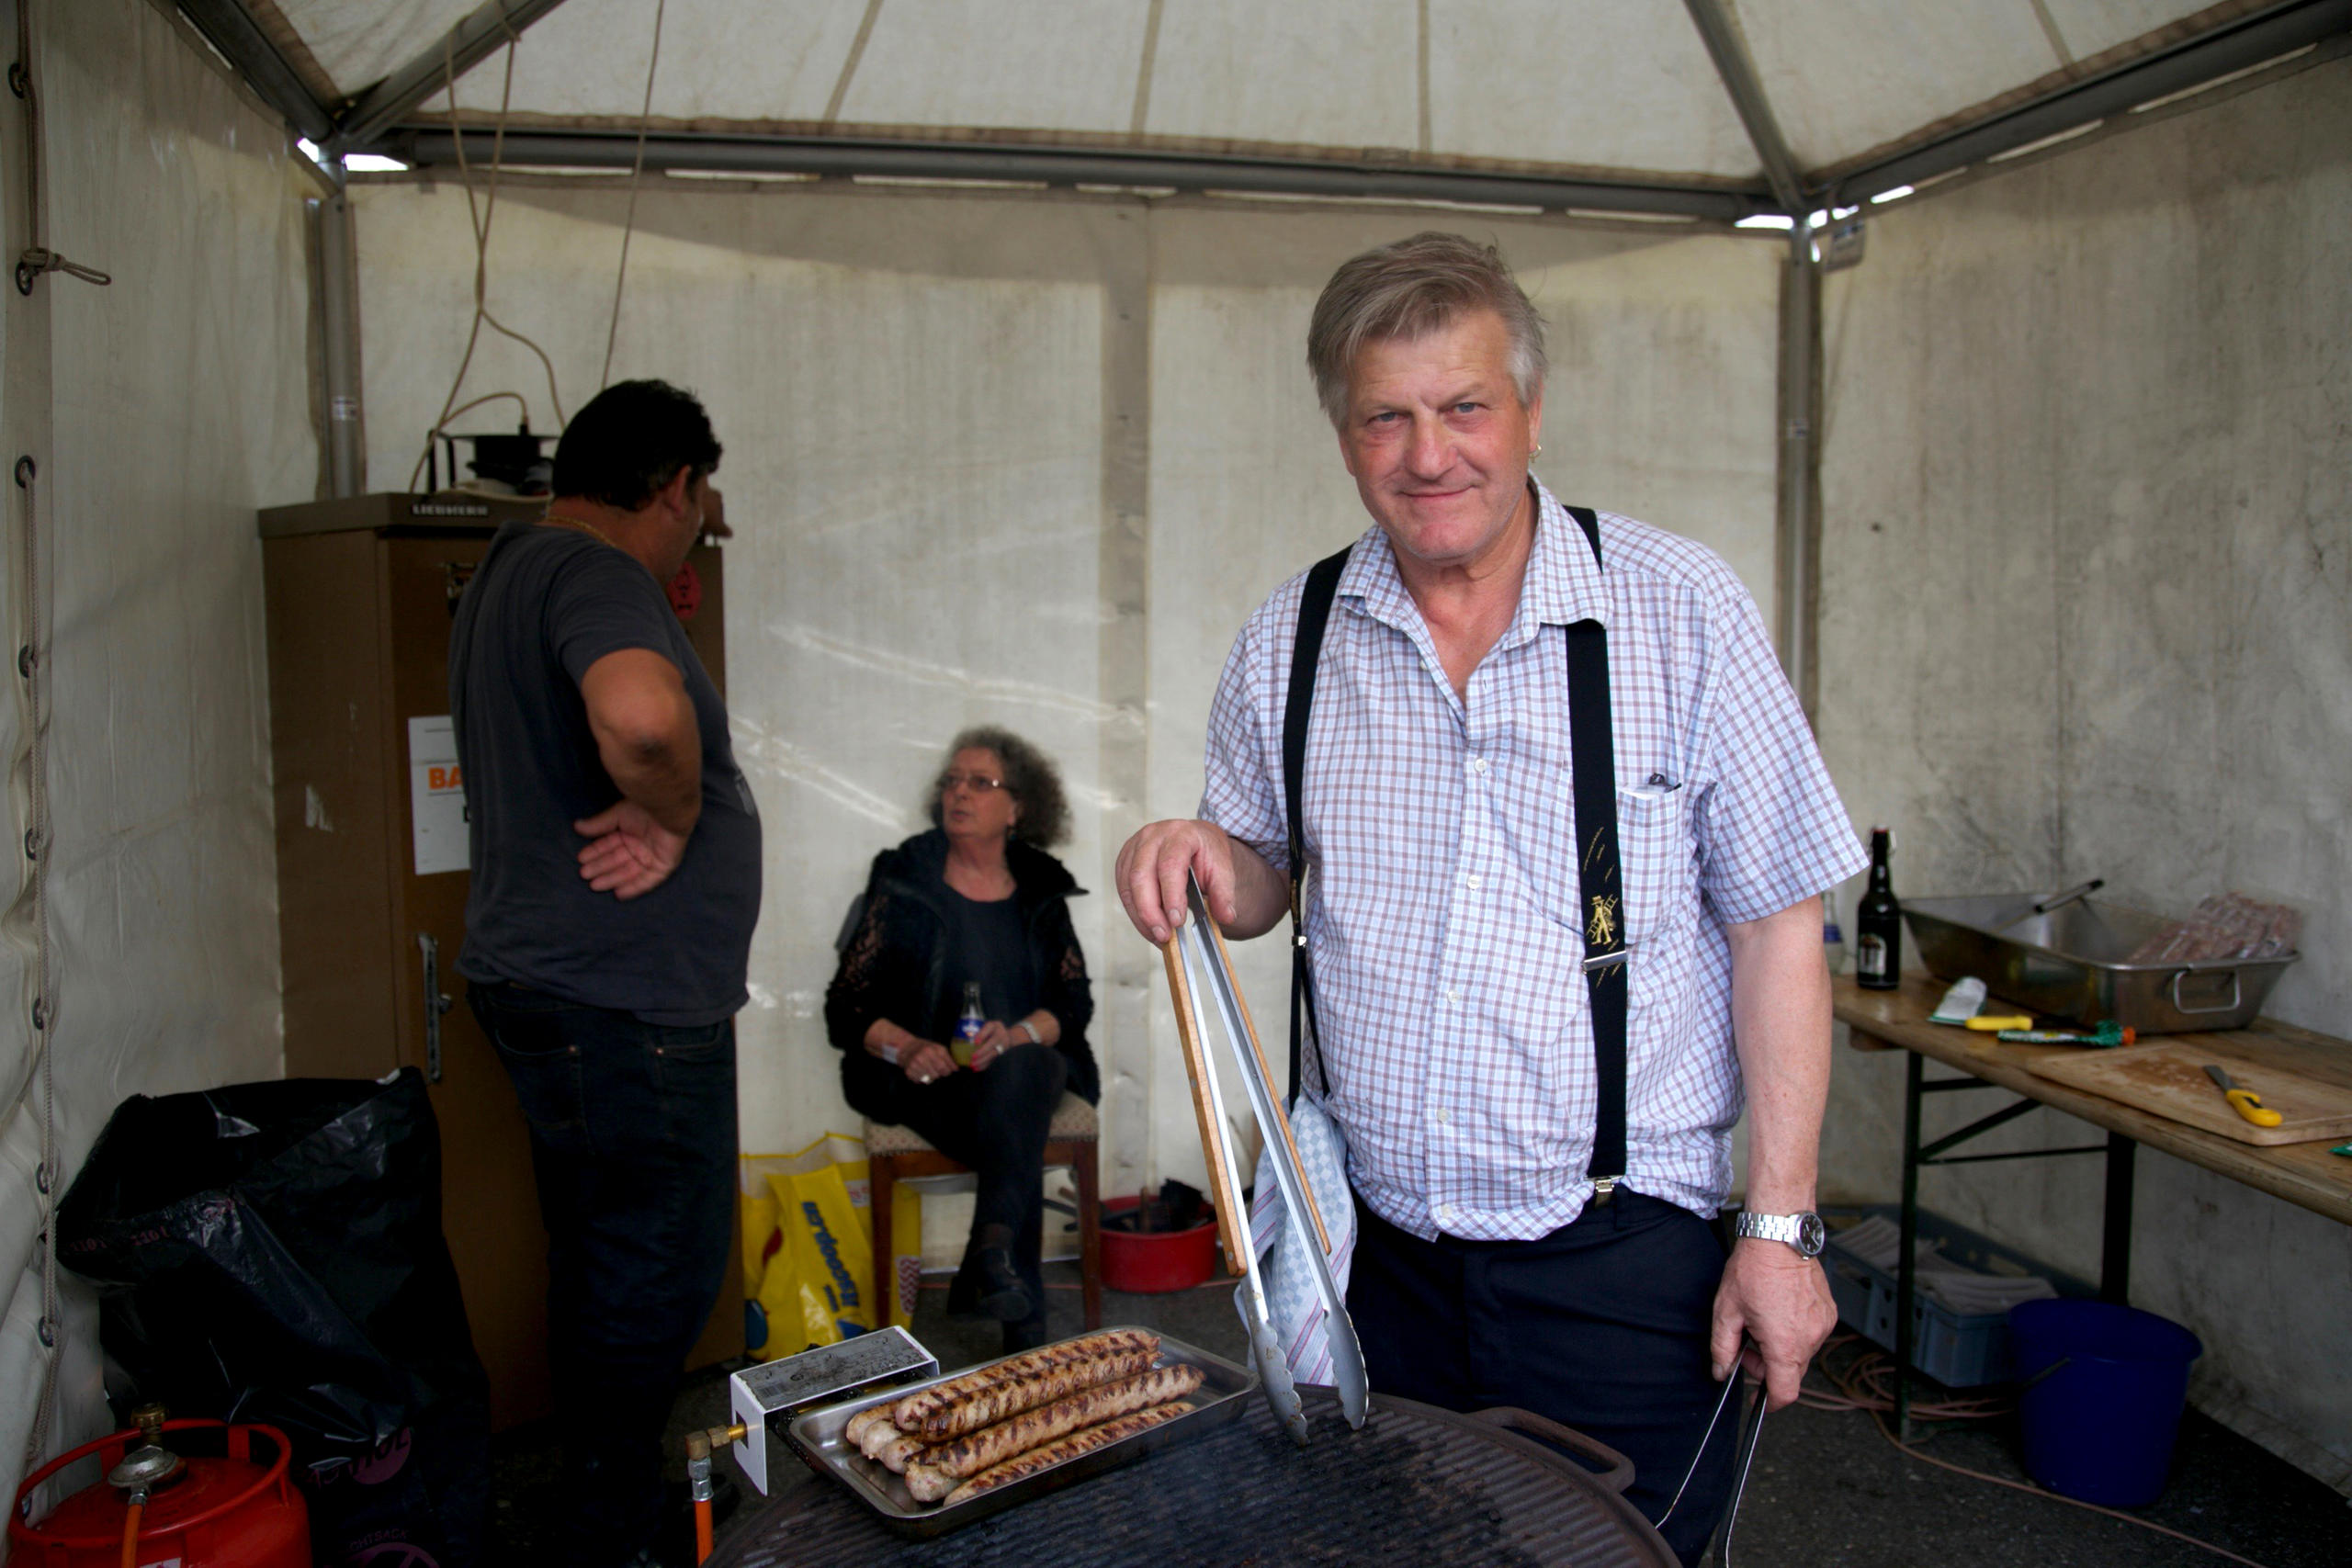 A man stands stands next to a grill holding grill tongs, two people are in the background.